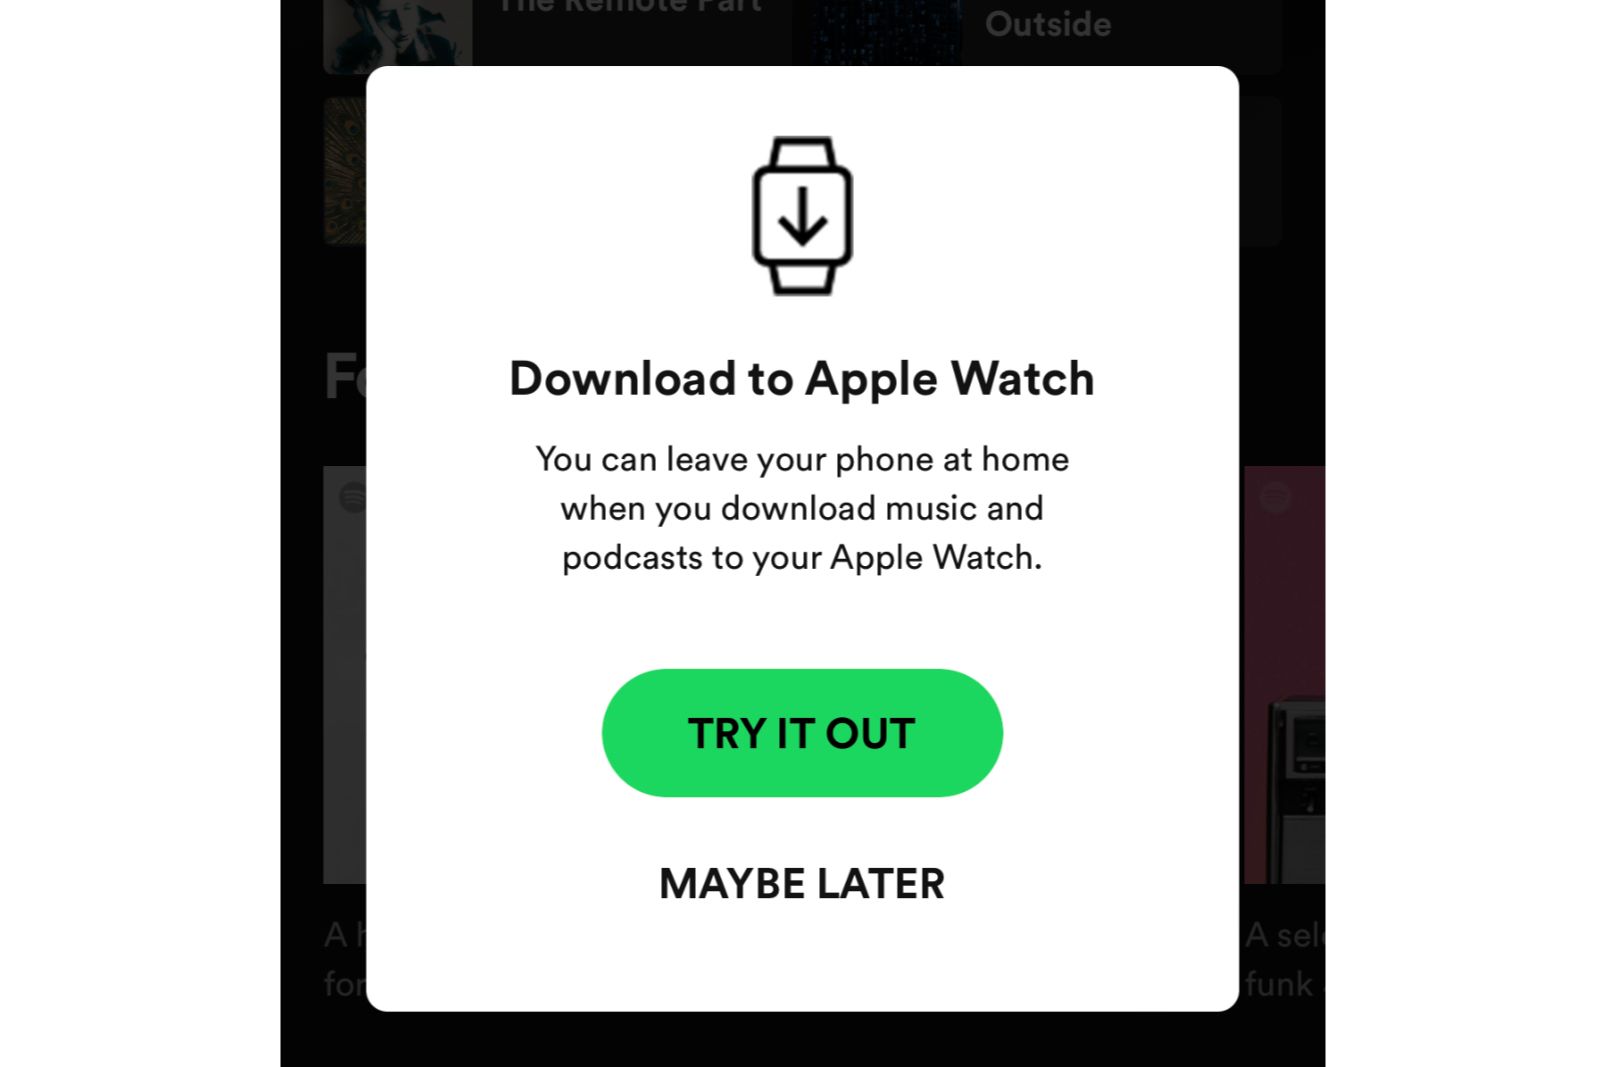 Spotify finally makes it easy to find your downloaded music in the app